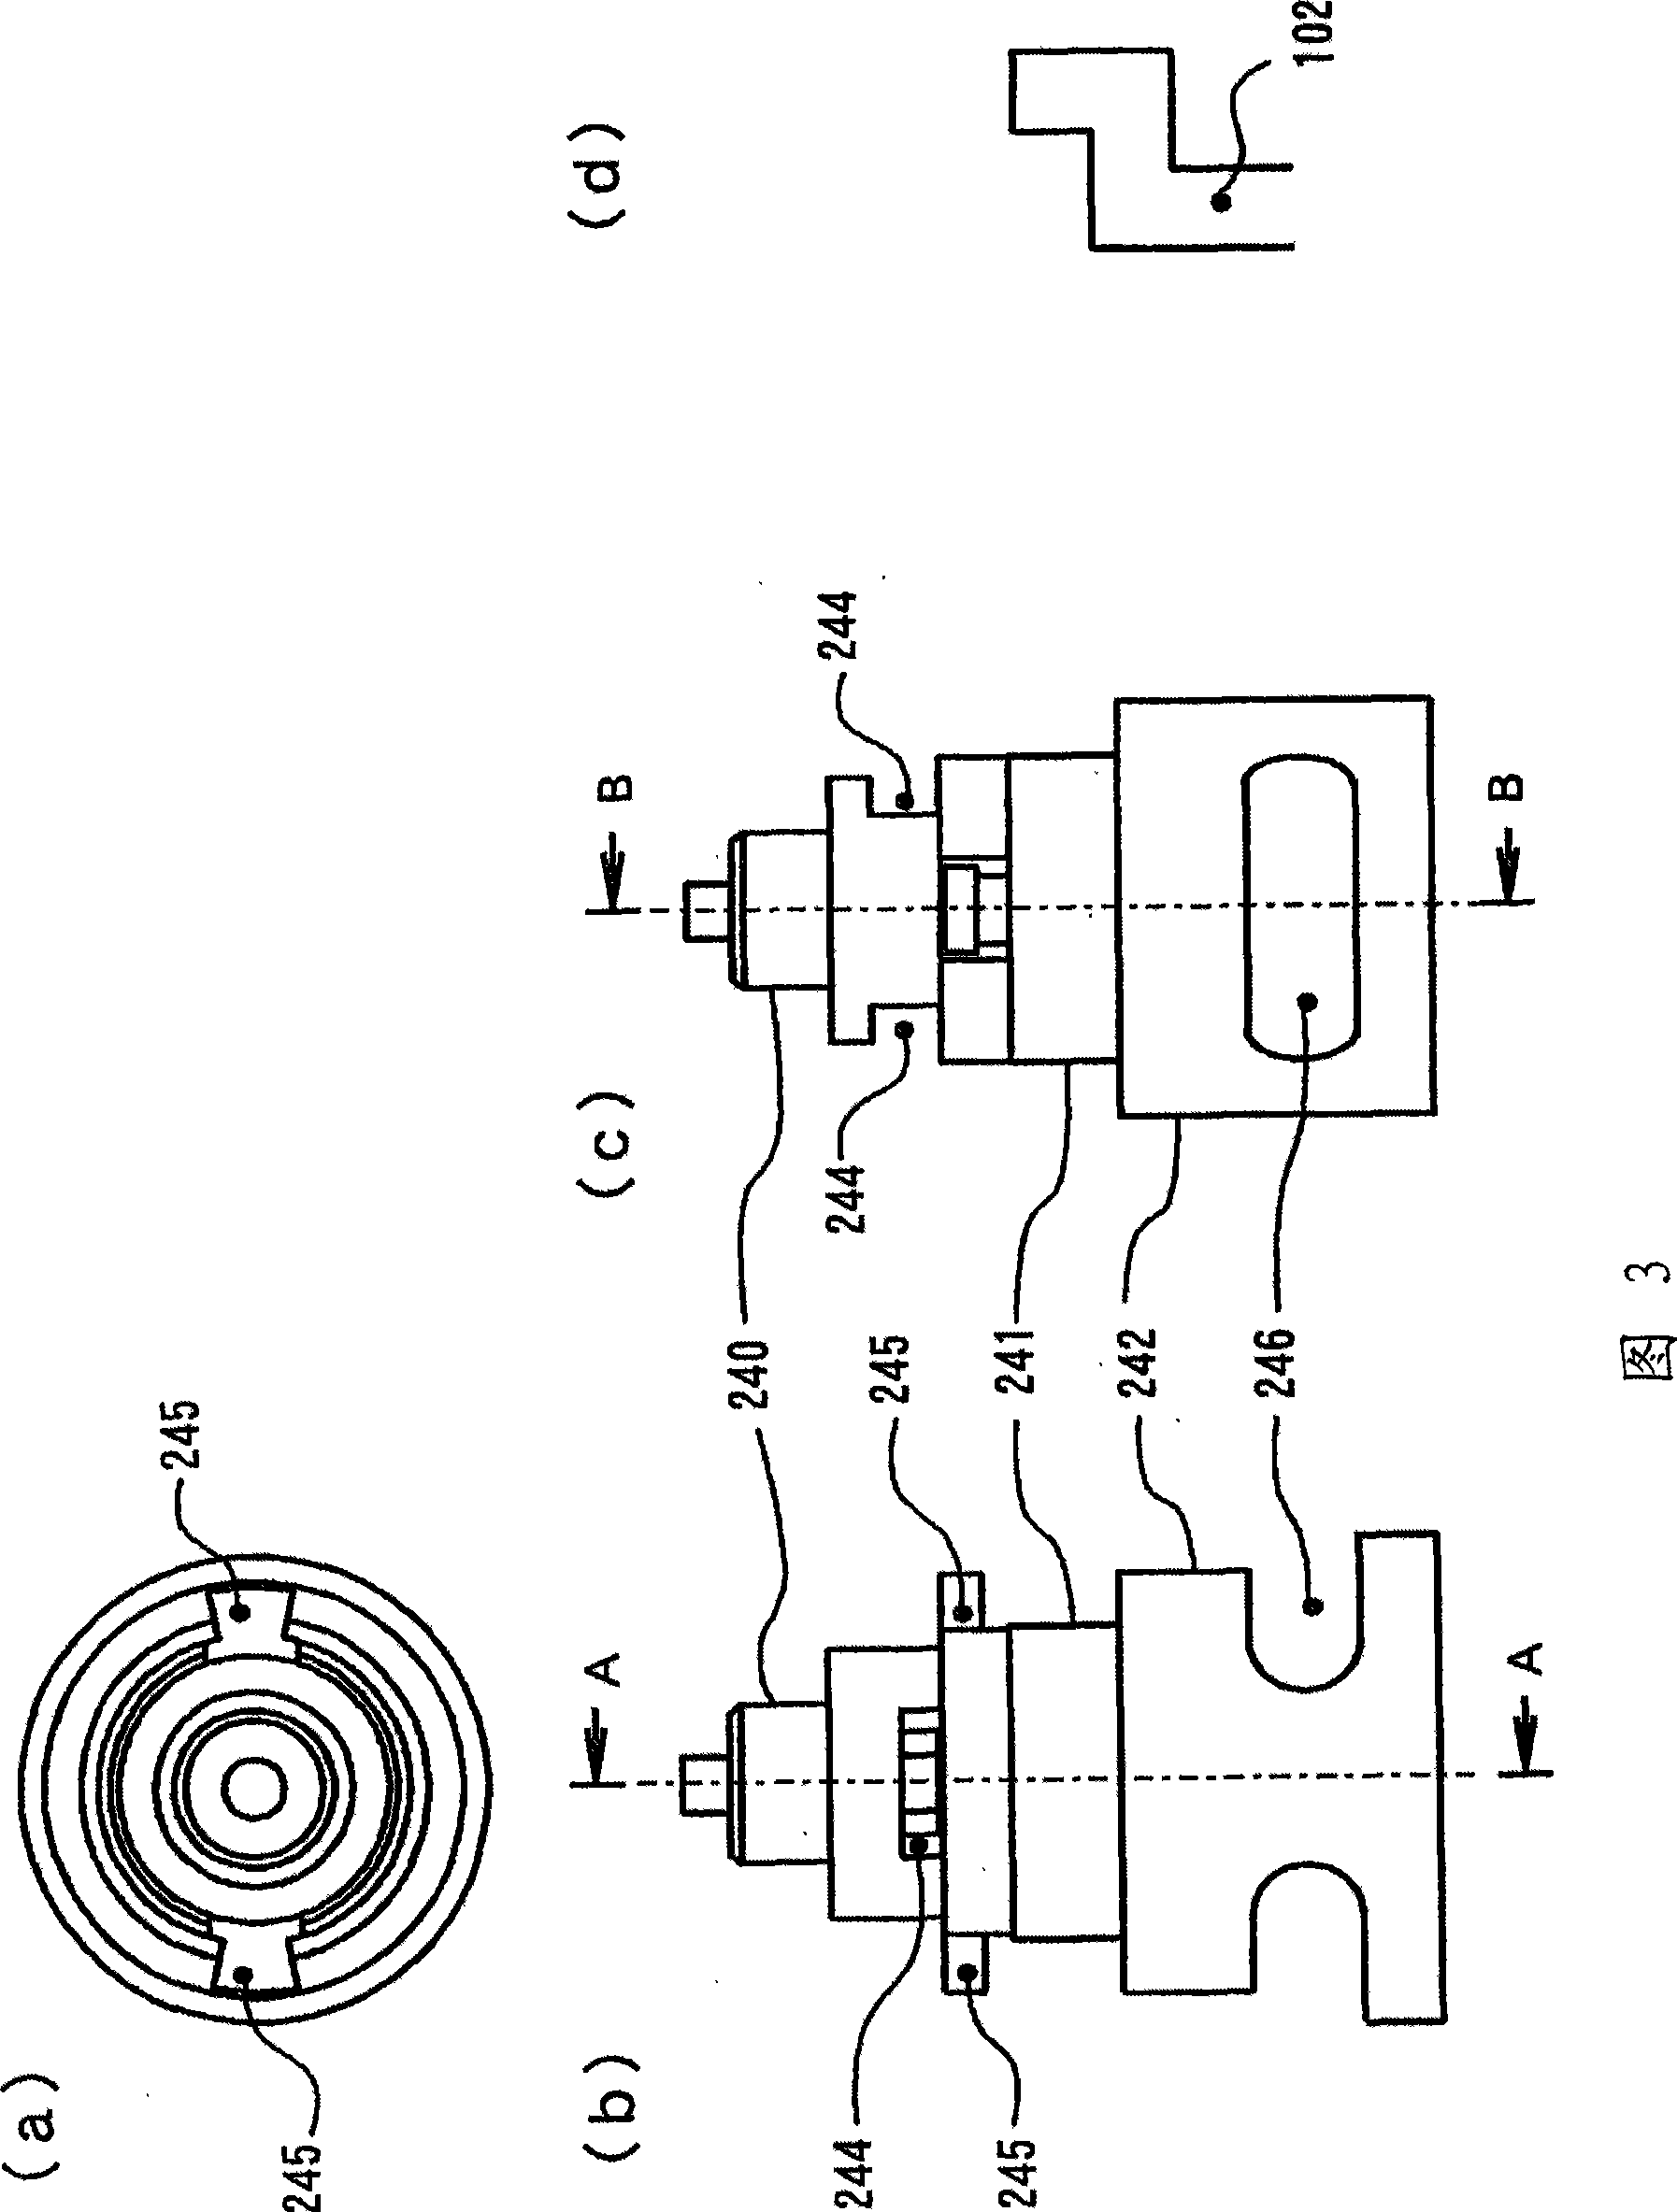 Electrode unit and ionizer